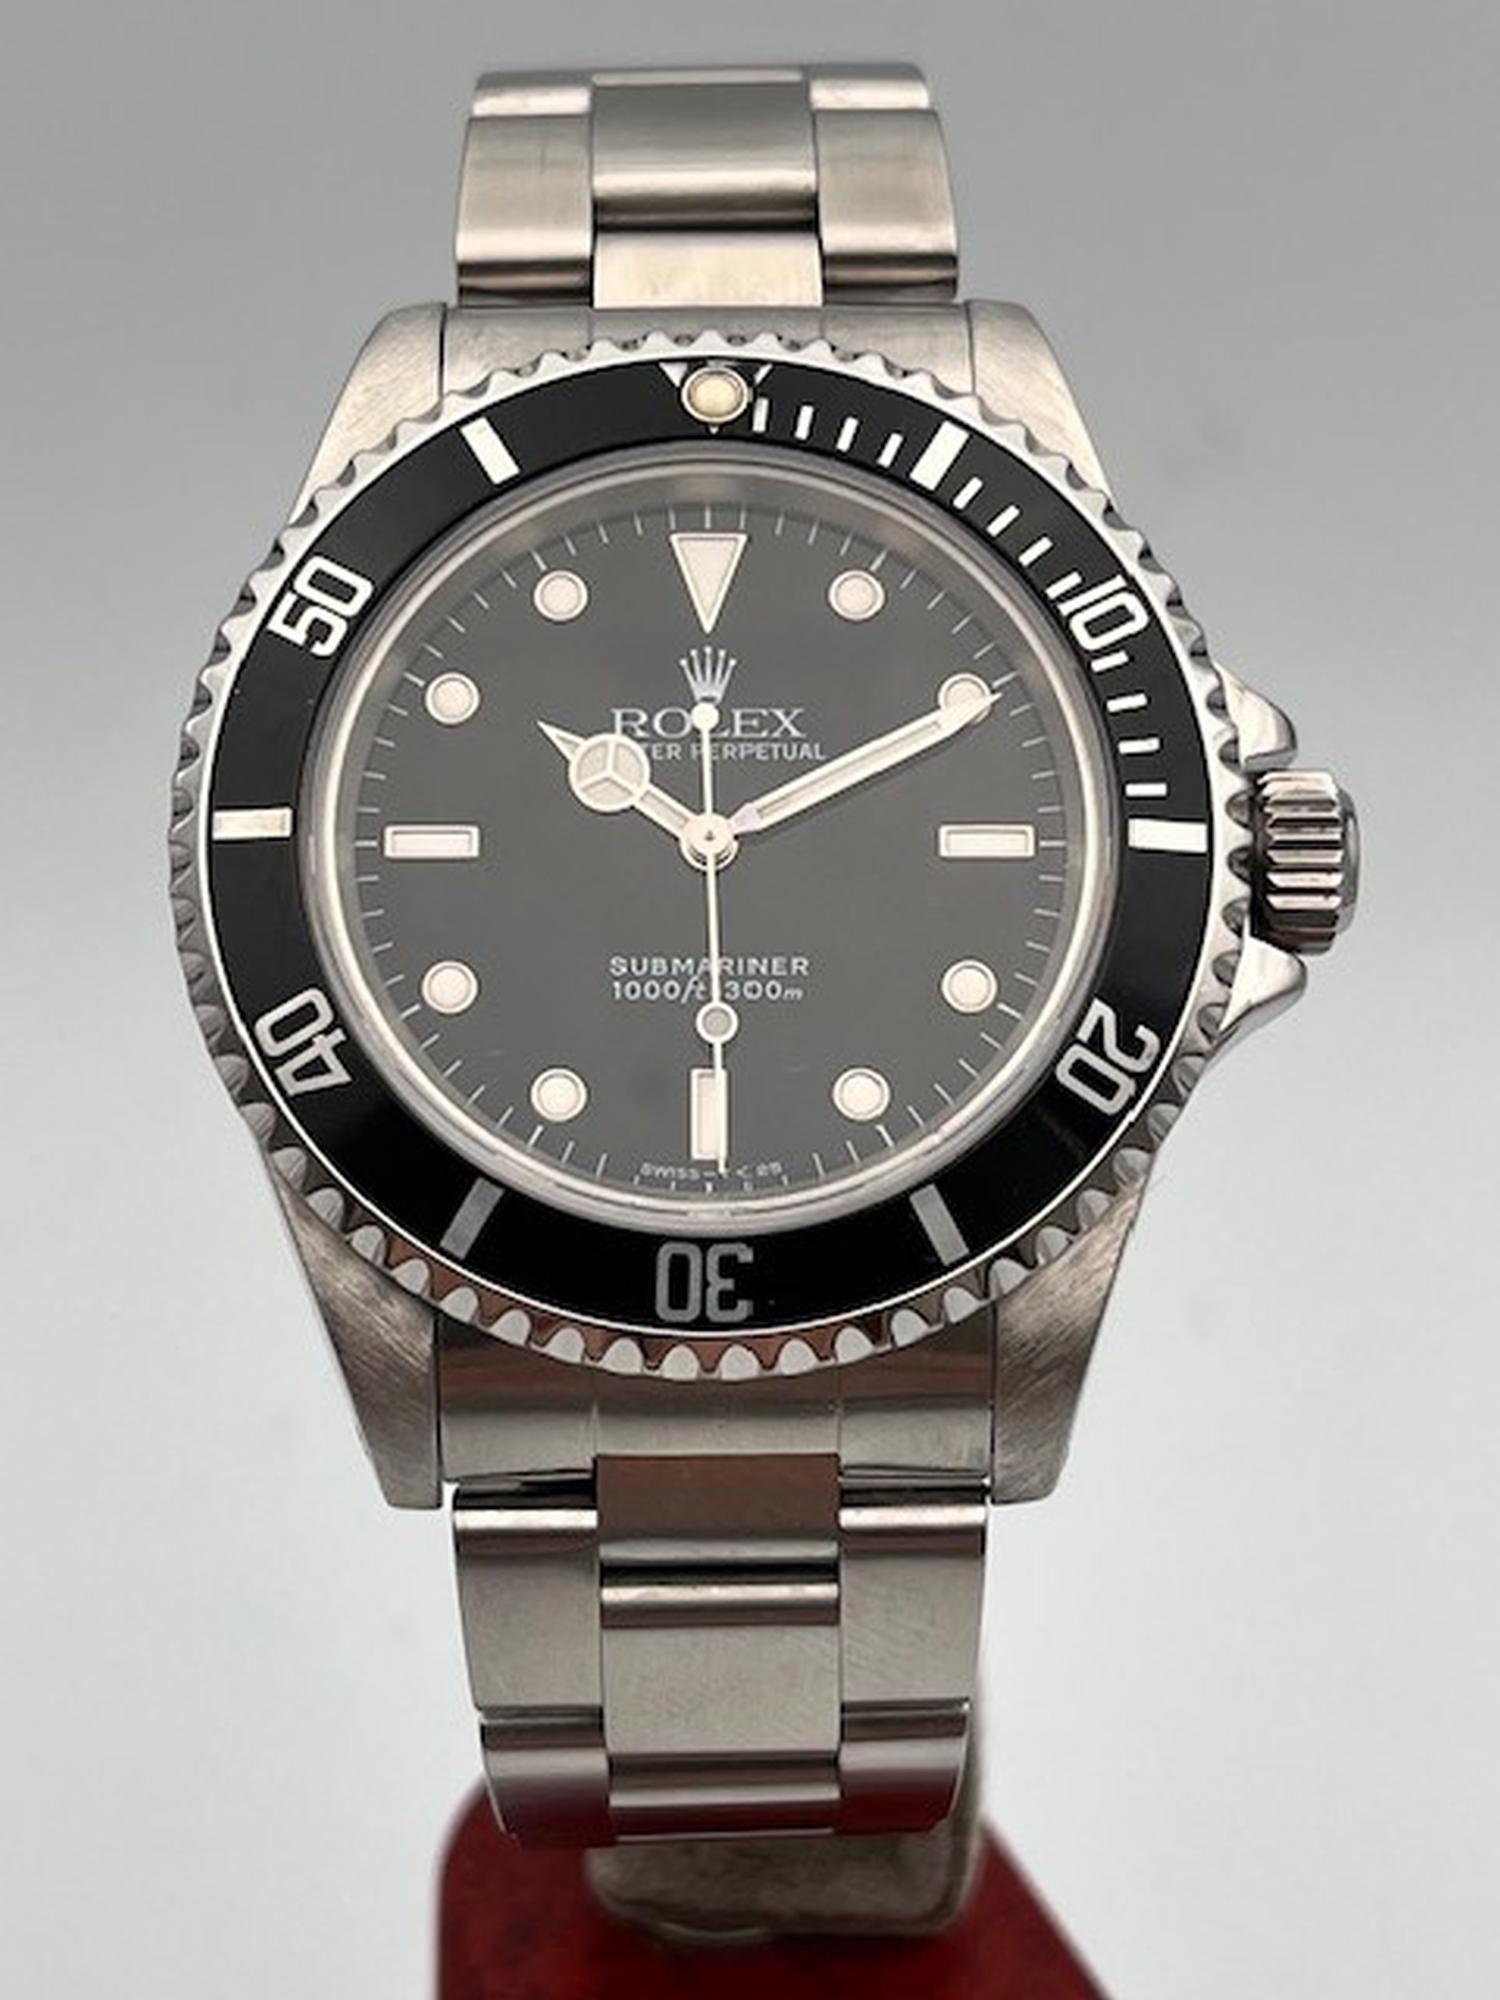 ROLEX SUBMARINER NO DATE 14060 WITH BOX AND PAPERS 1998 - Image 3 of 9